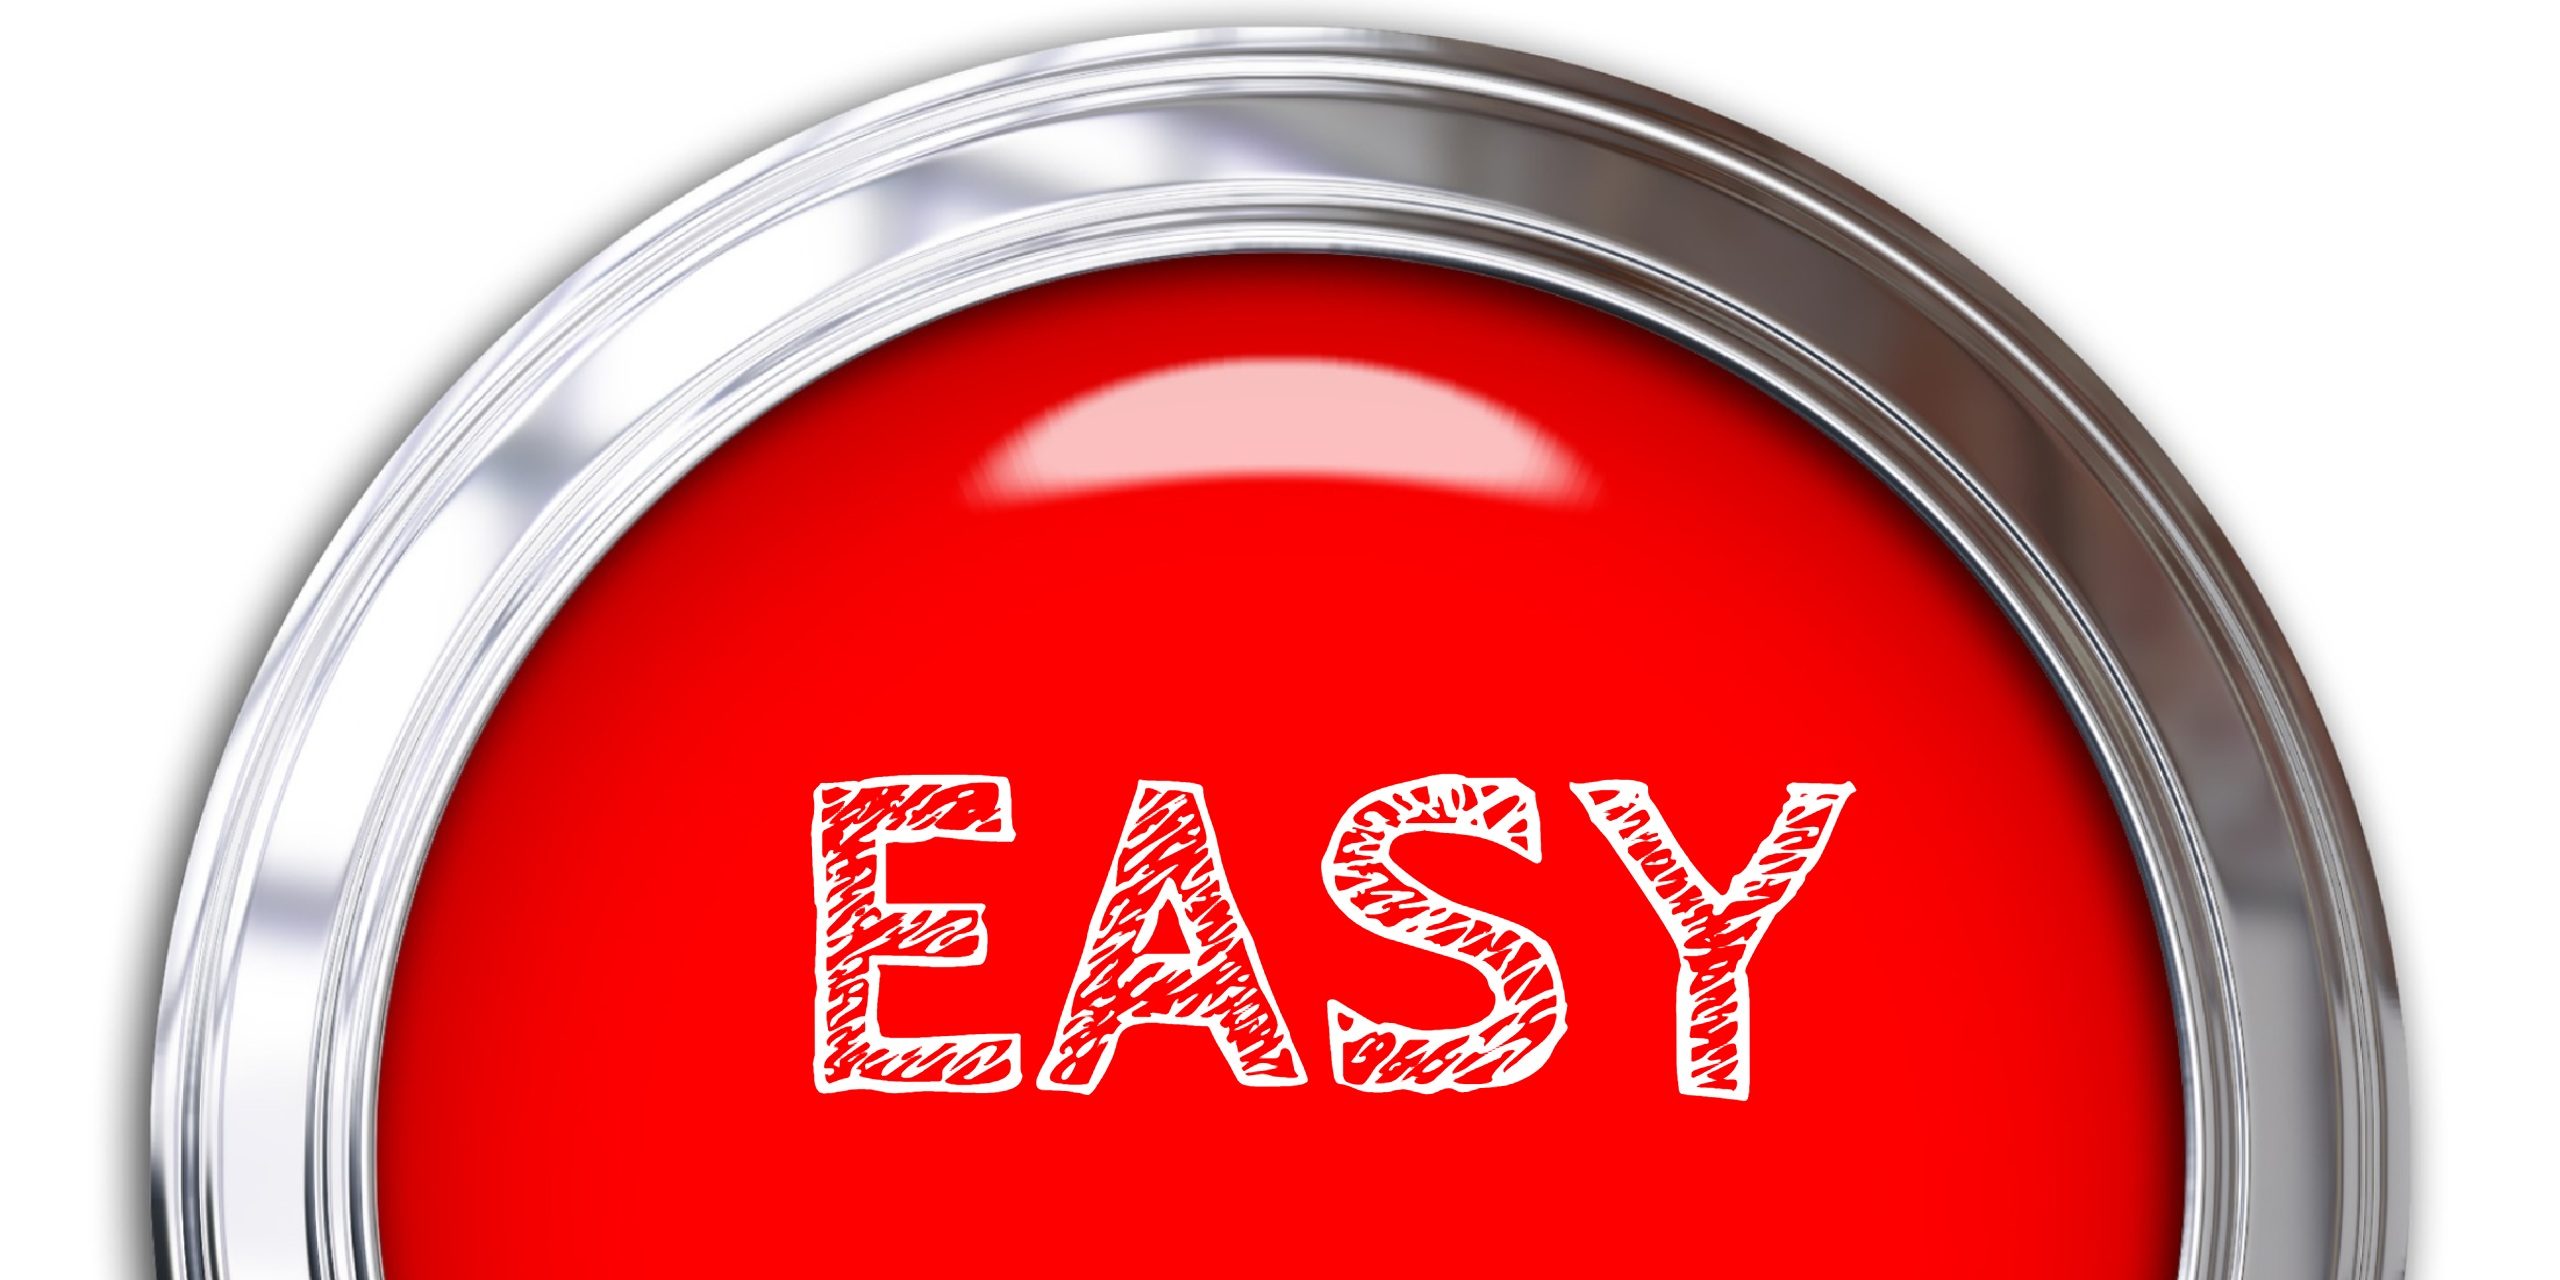 Is There An "Easy Button" In The House?